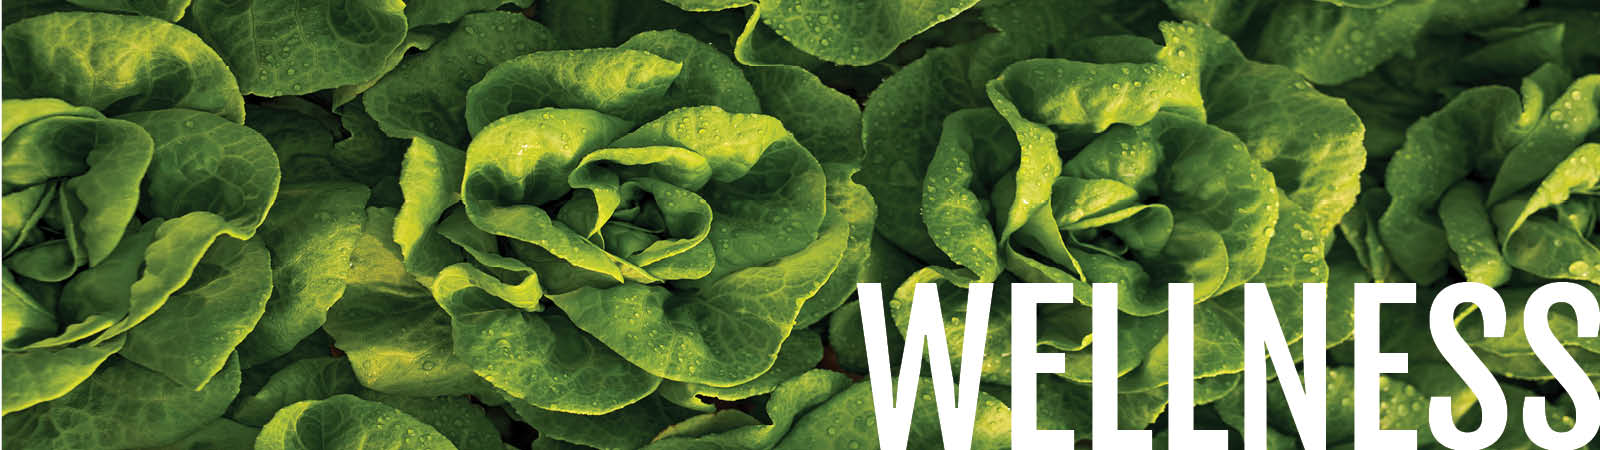 Wellness page header with picture of vibrant green lettuce